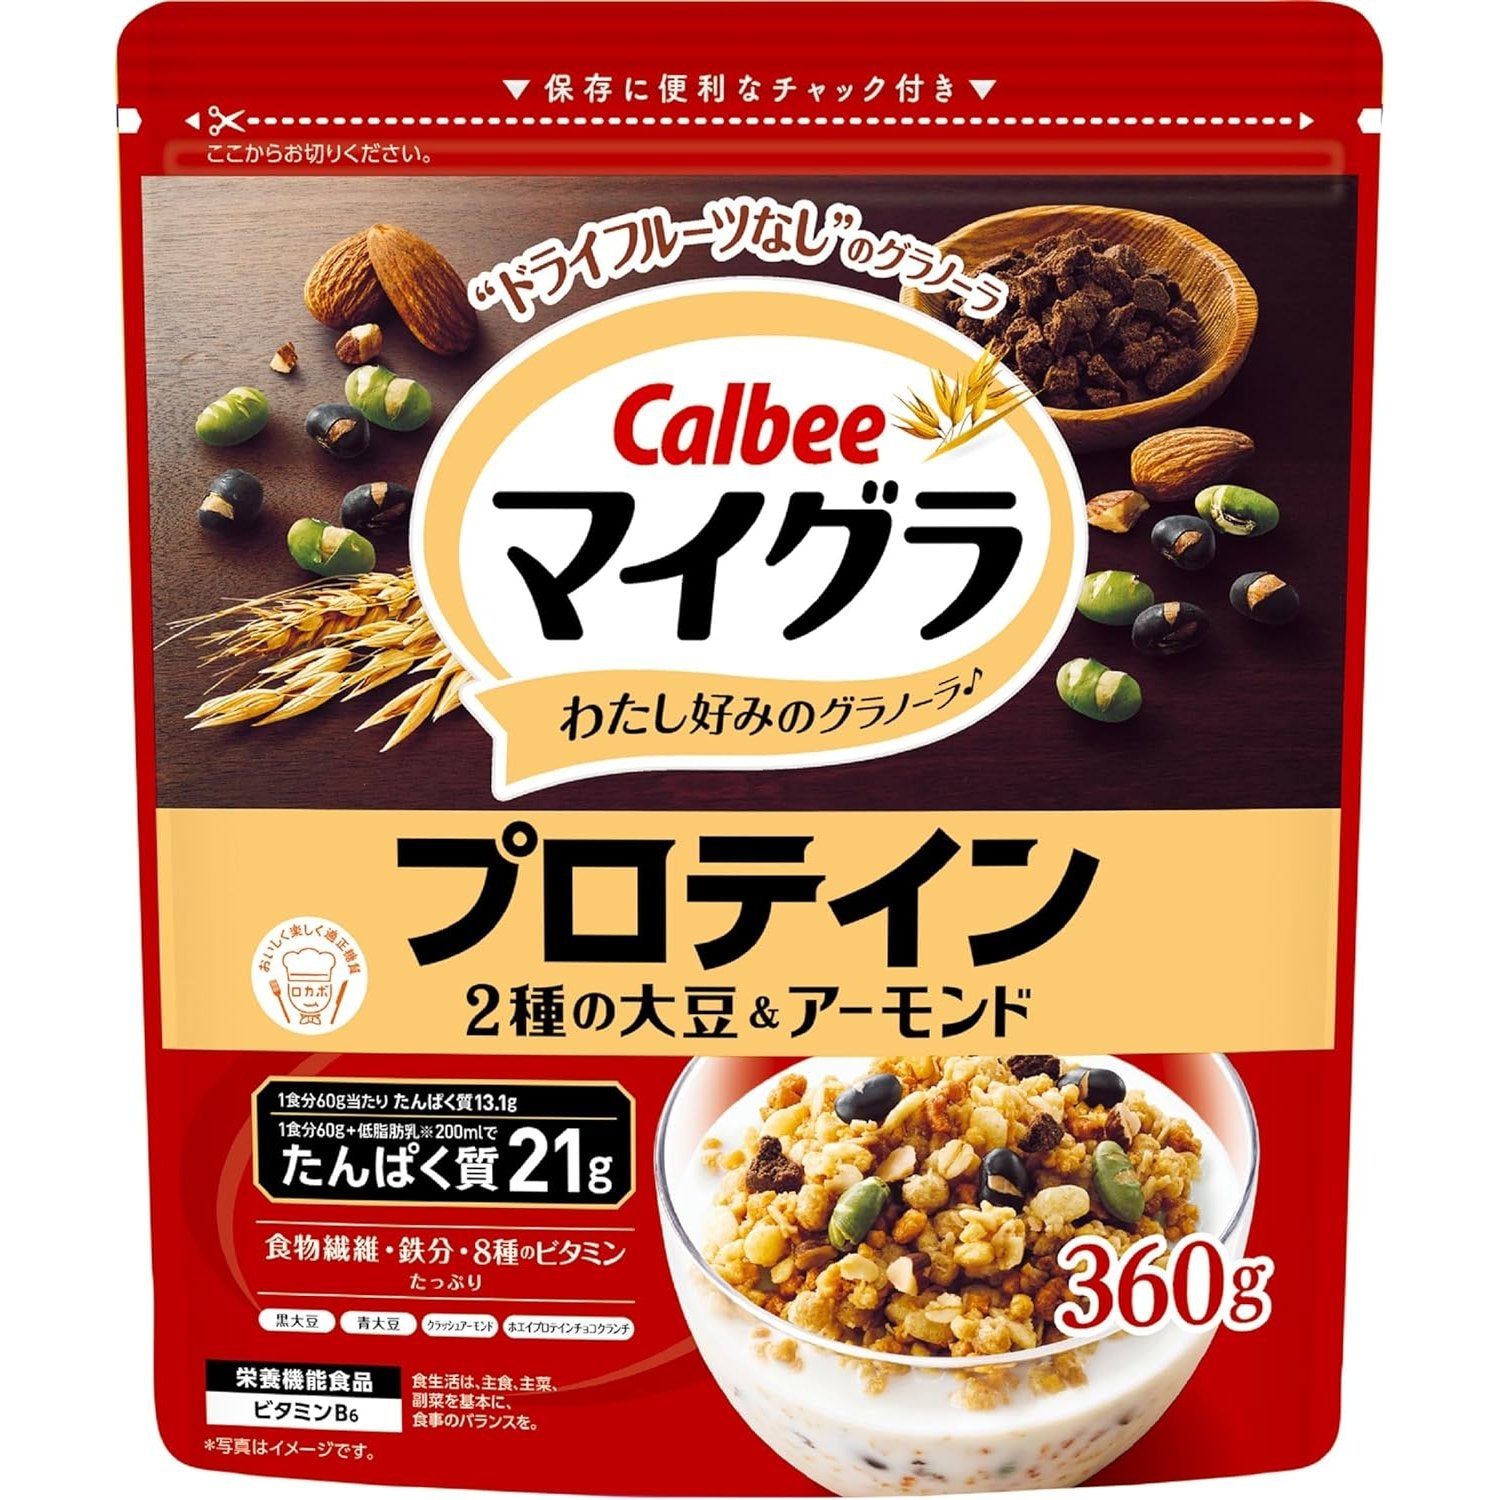 Calbee-Whey-Protein-Granola-Cereal-With-Almonds-and-Beans-360g-1-2024-03-29T07:18:58.259Z.jpg